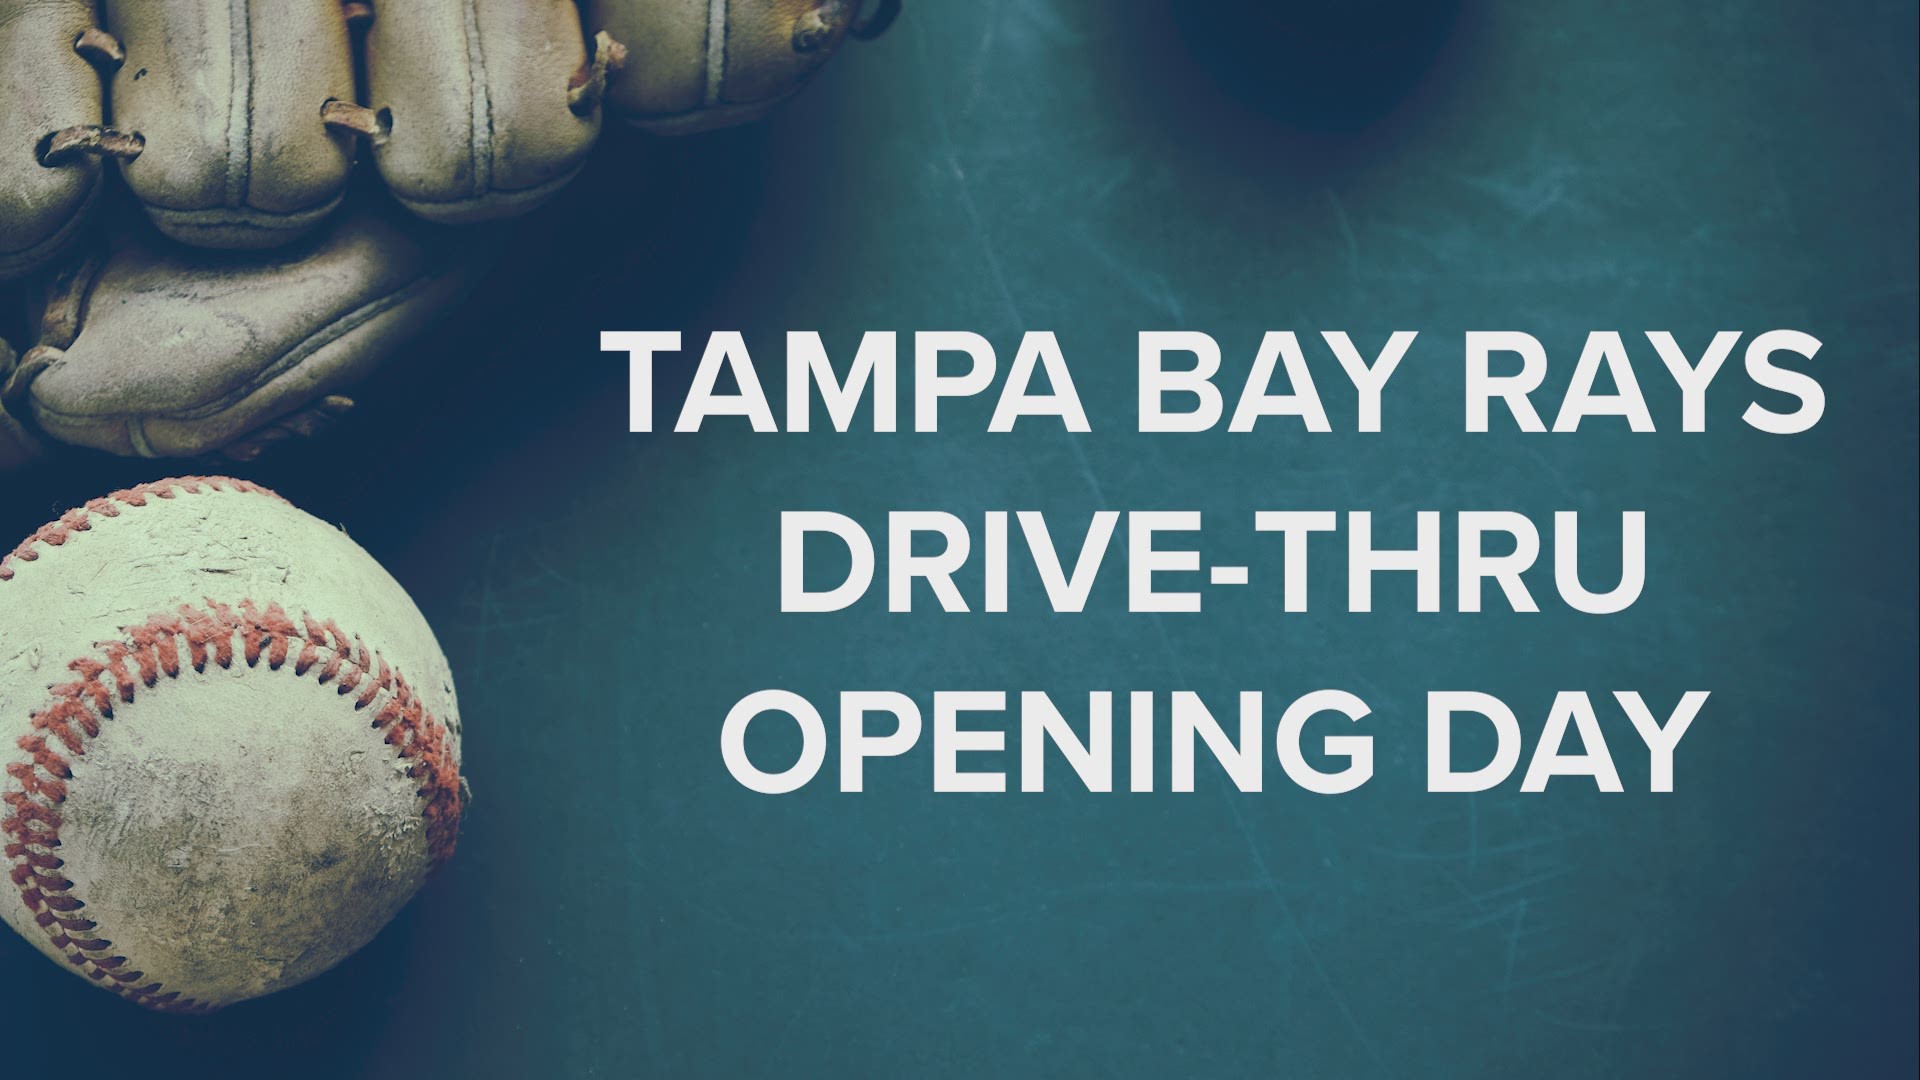 Fans will have the opportunity to donate to 10 Tampa Bay and Feeding Tampa Bay’s Cereal for Summer Drive, which works to fight hunger during the summer school break.